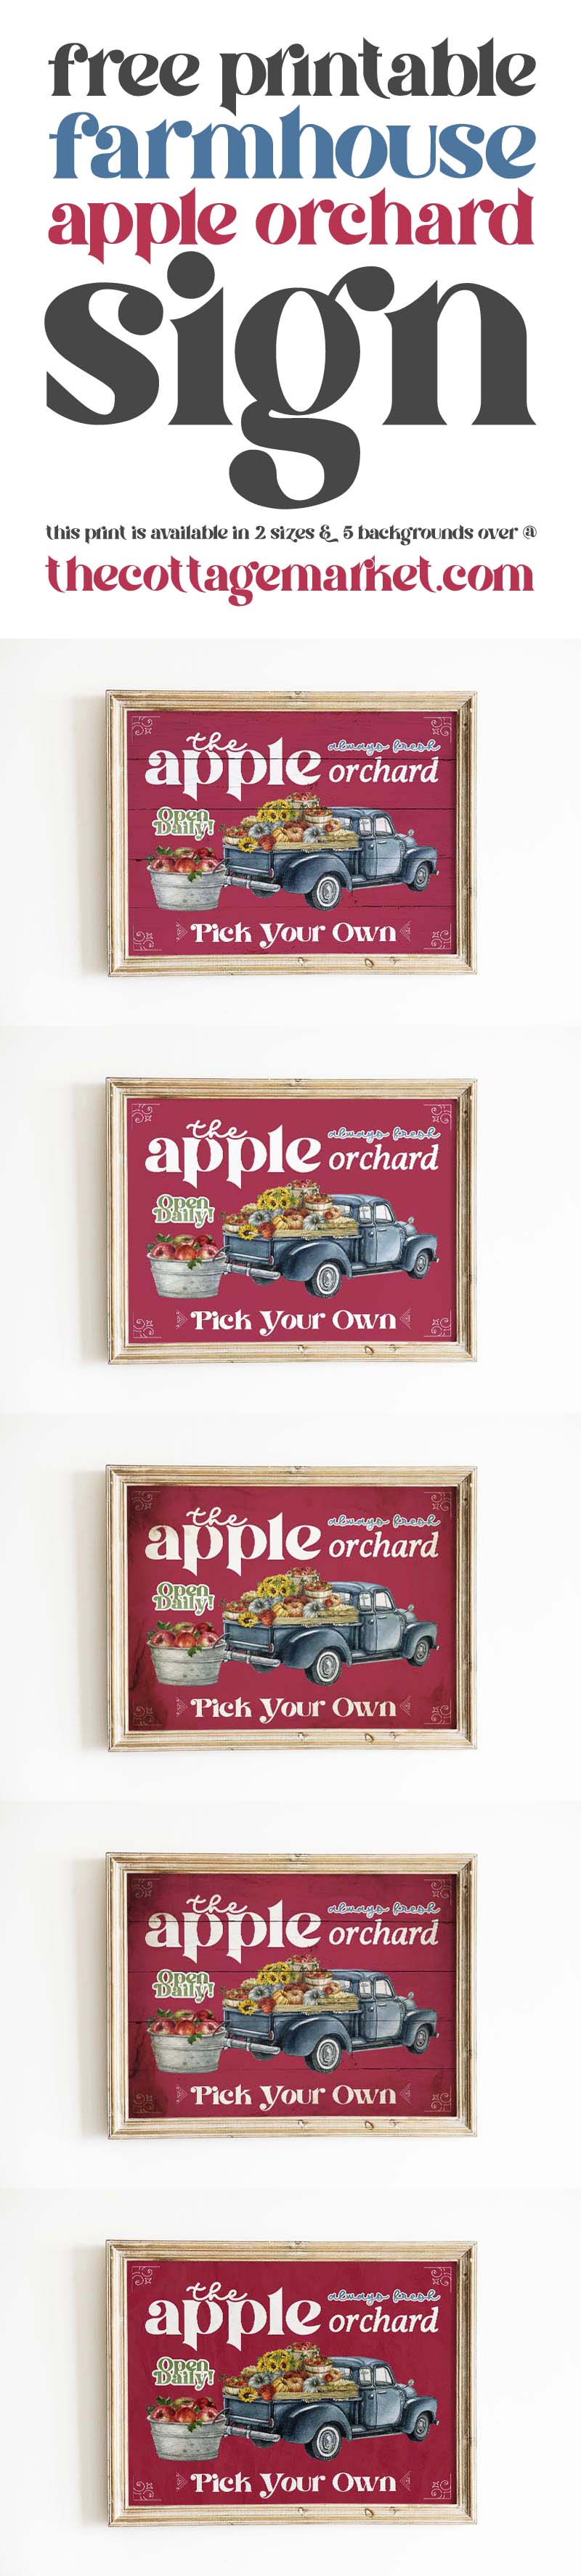 This Free Printable Farmhouse Apple Orchard Sign will bring a perfect touch of Fall Charm to your beautiful home.